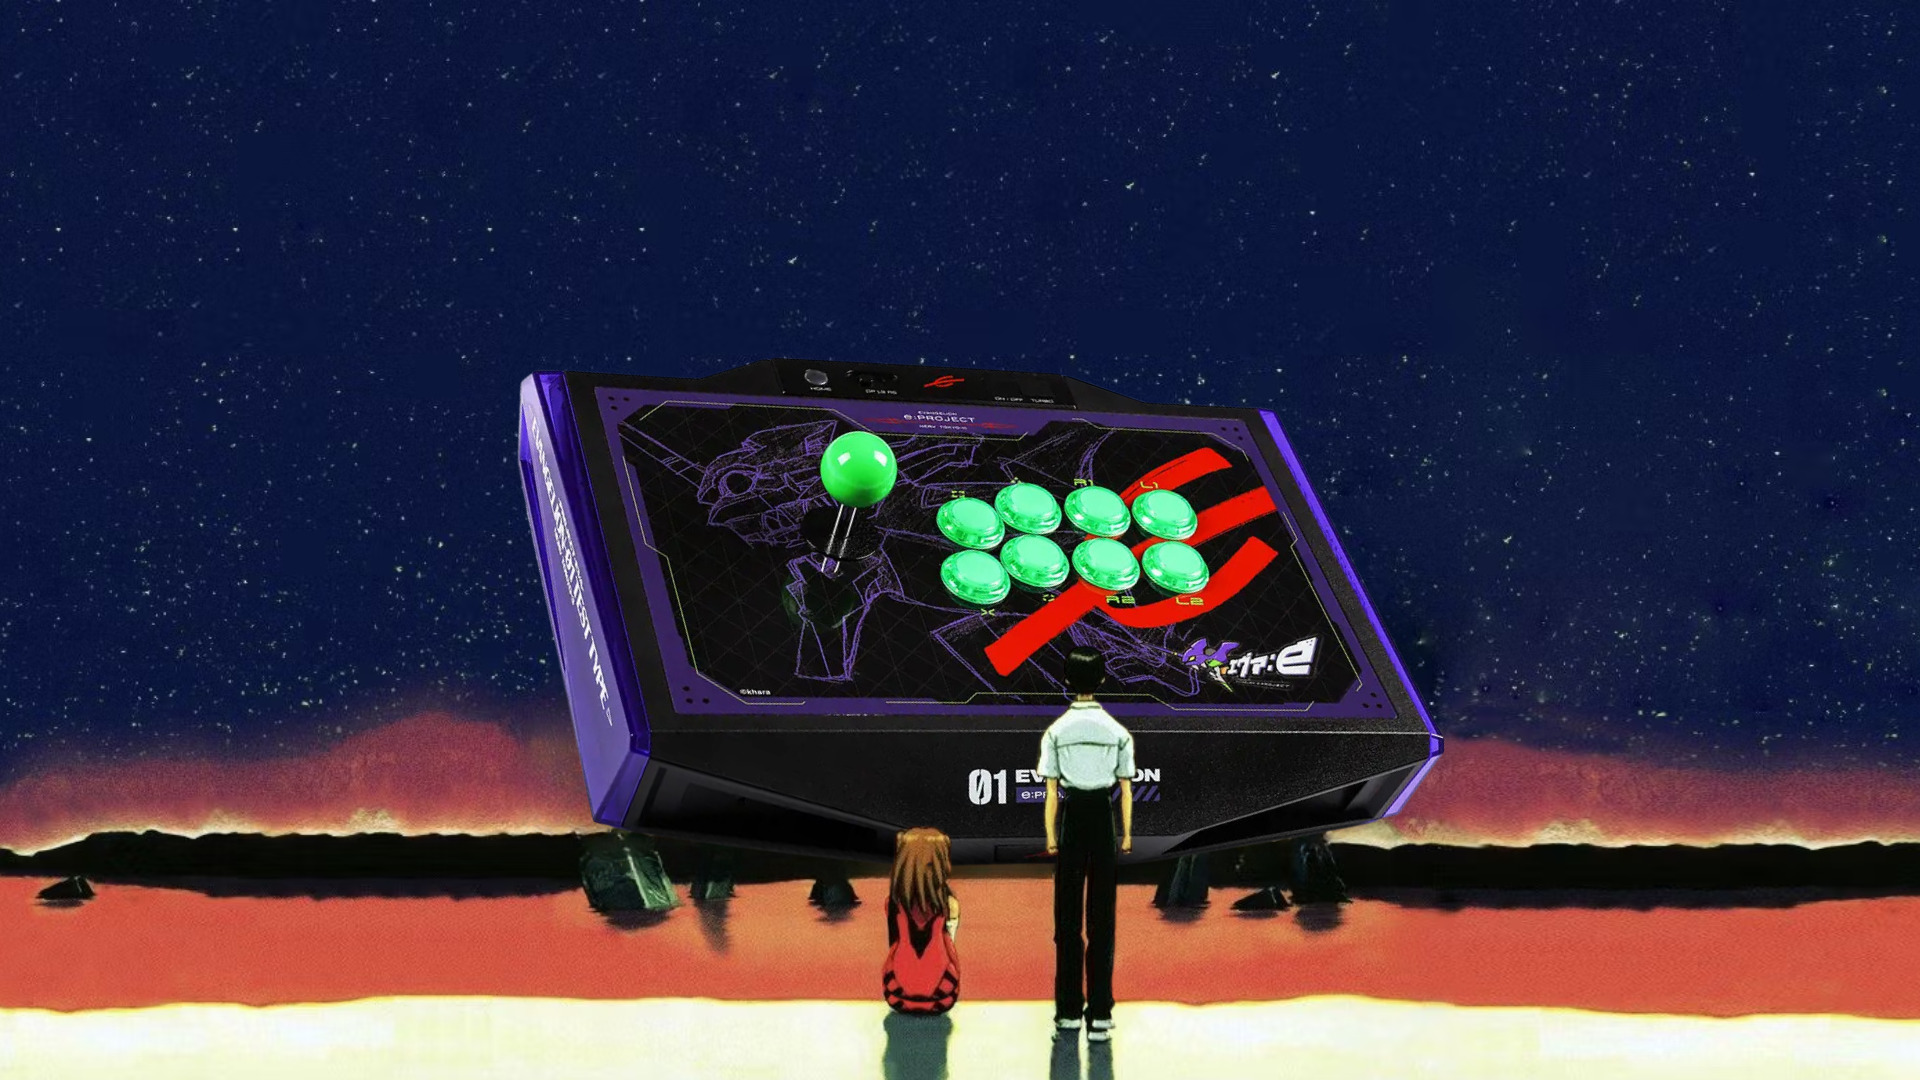 Shinji, get in the fight stick: Evangelion-themed controller 